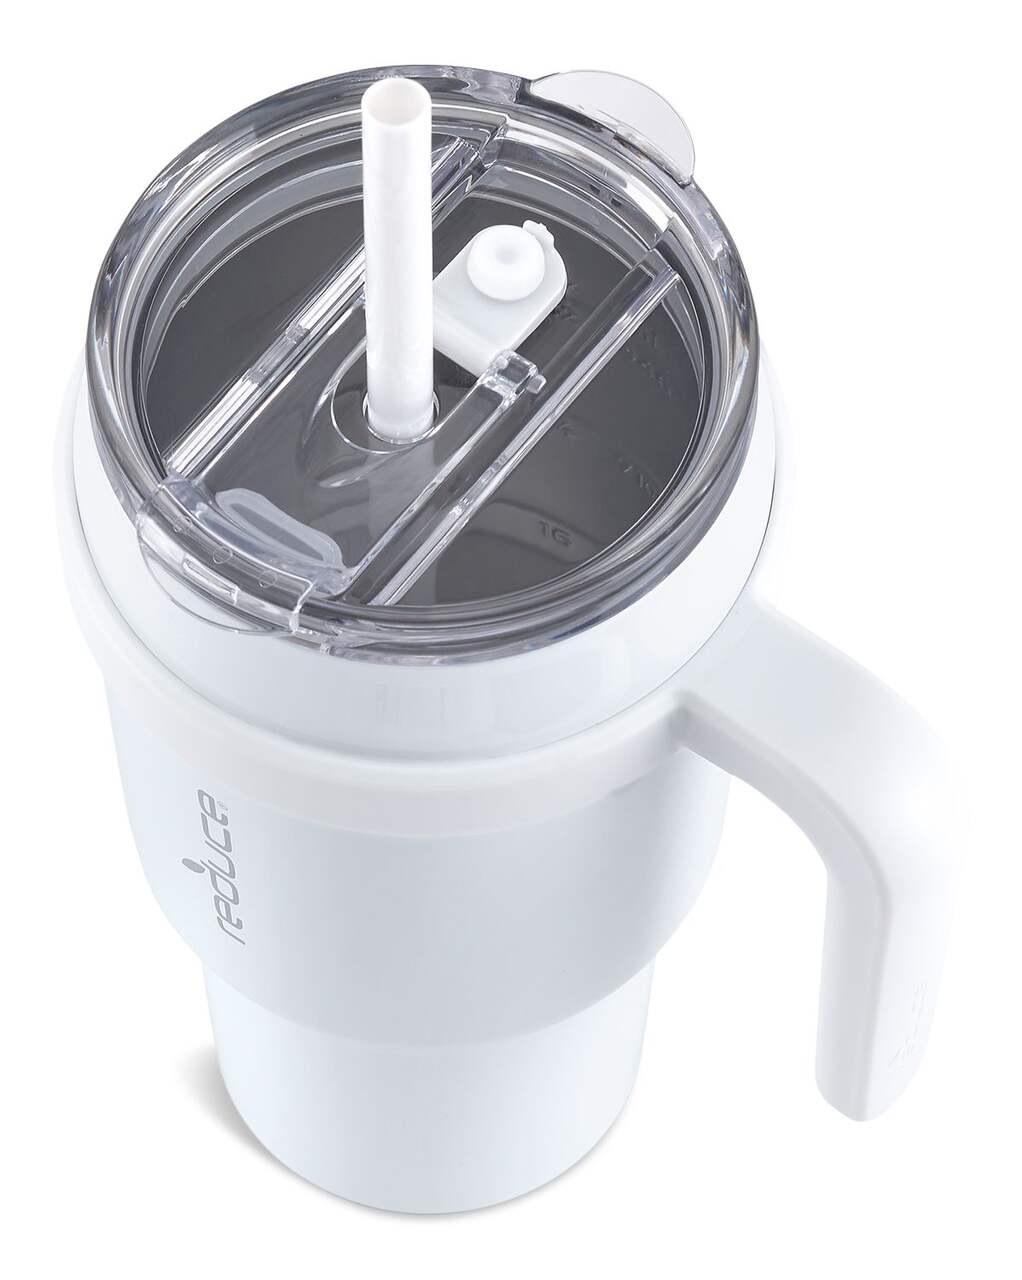 https://media-www.canadiantire.ca/product/living/kitchen/food-storage/1426436/reduce-3-in-1-tumbler-40oz-white-3365e6e2-7687-43c8-a4ff-80b63d5a2f32-jpgrendition.jpg?imdensity=1&imwidth=1244&impolicy=mZoom